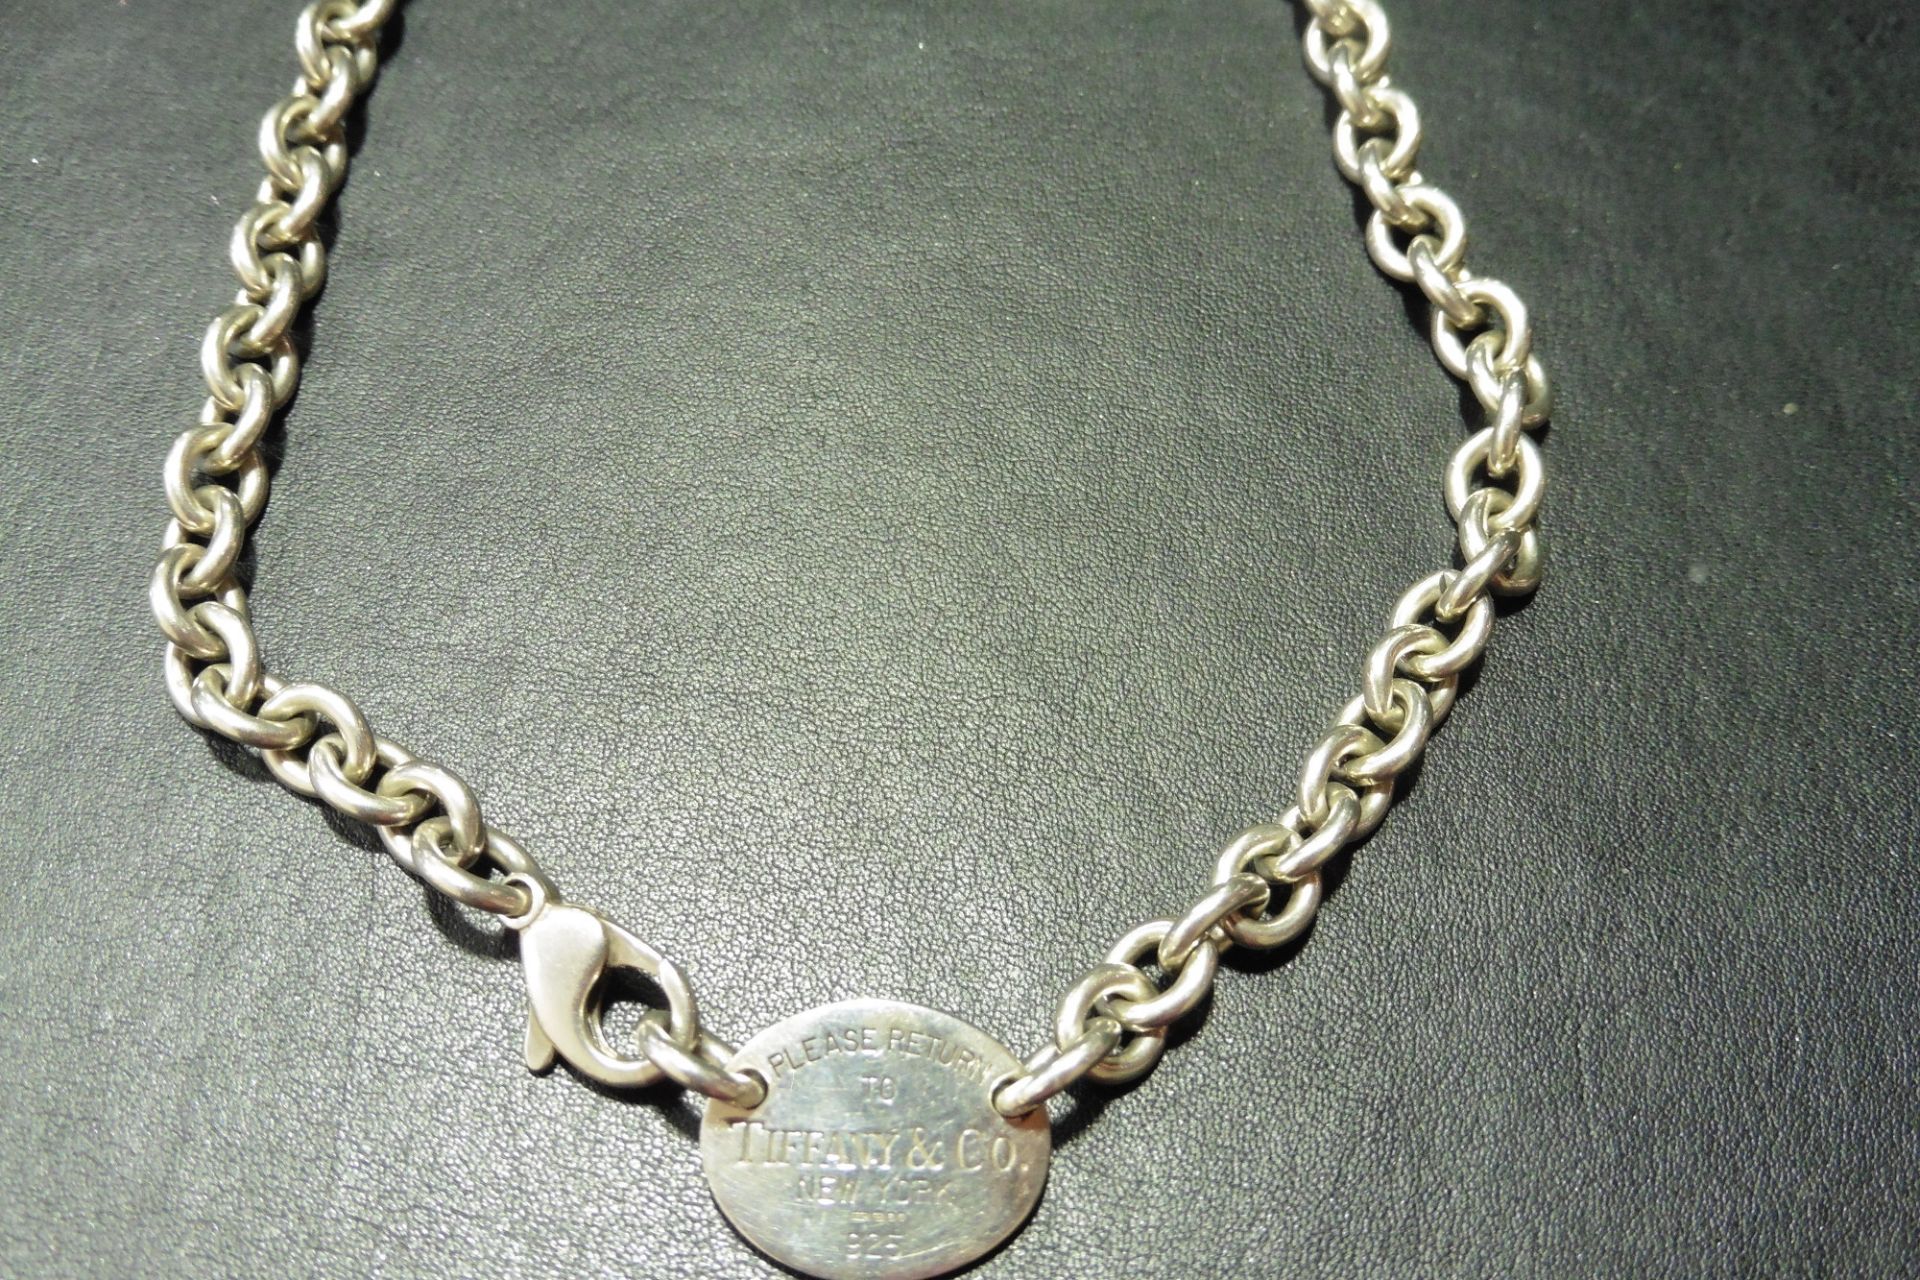 Pre-owned sterling silver Tiffany & Co chunky tag necklace. Has oval tag with 'Return to Tiffany '